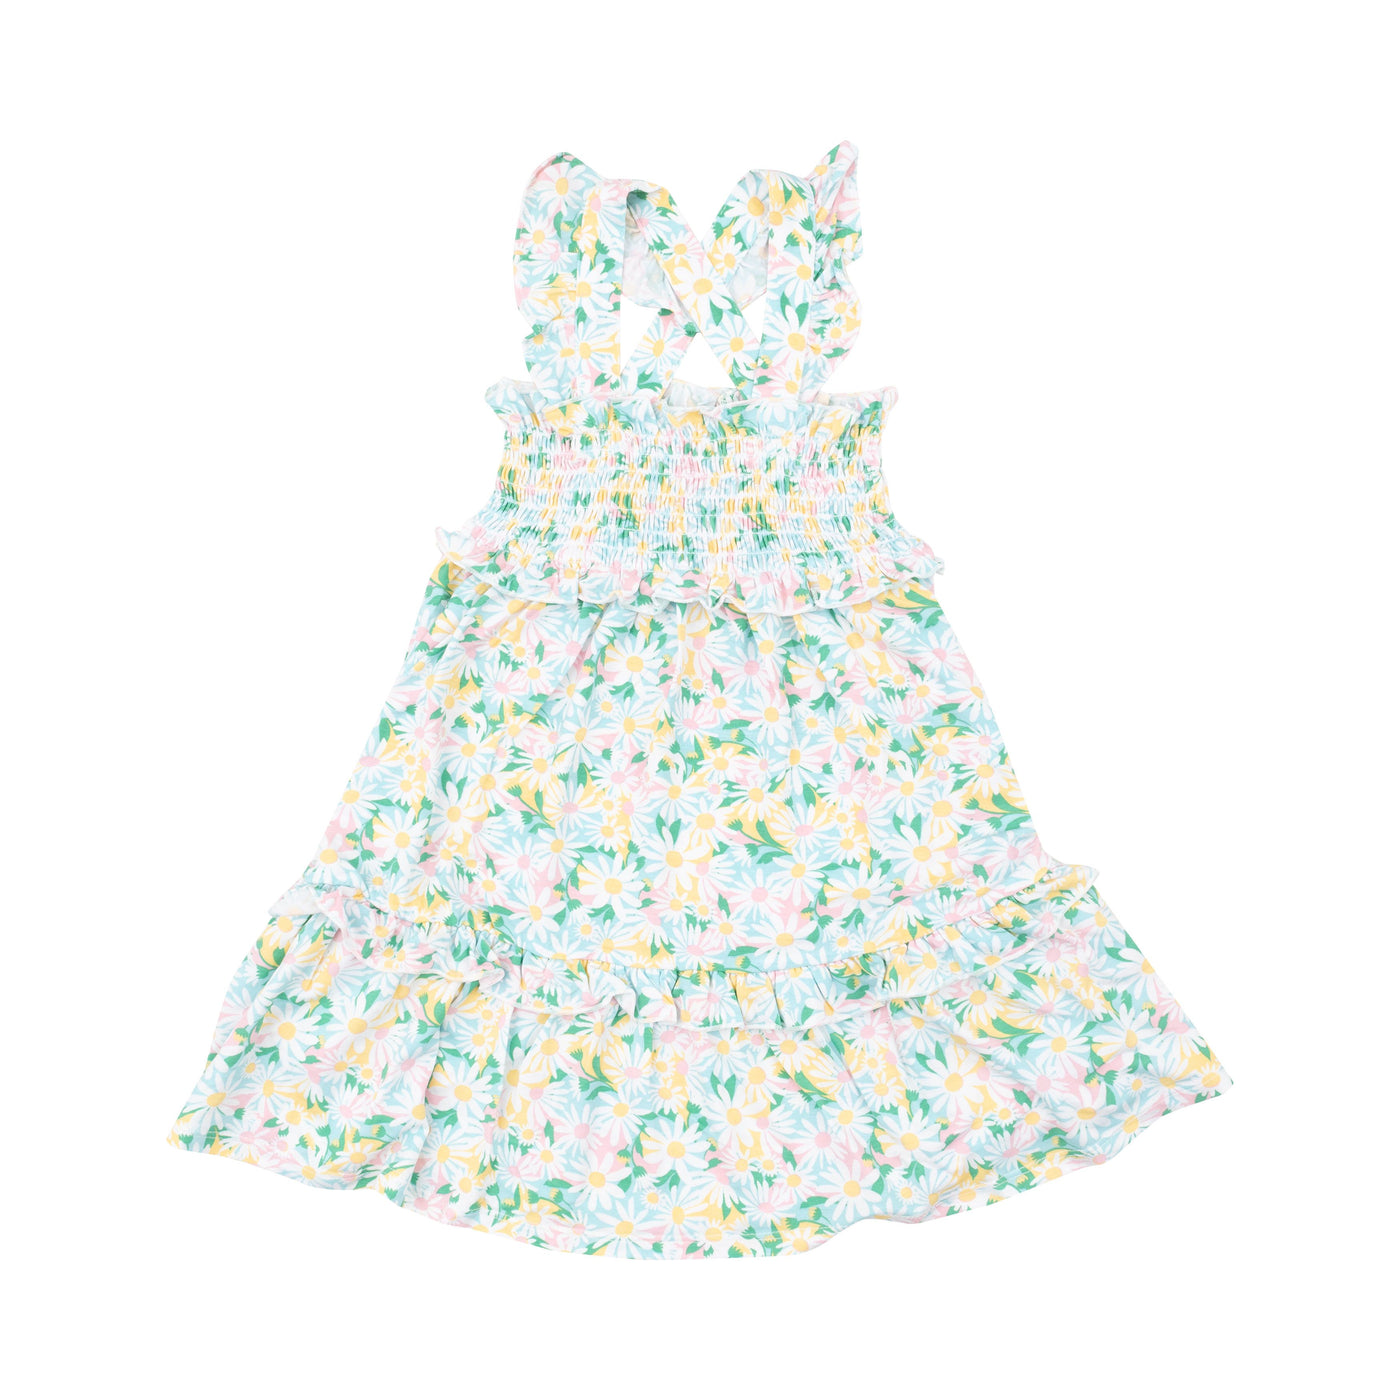 Angel Dear Smocked Ruffle Tiered Sundress: Color Fill Daisies